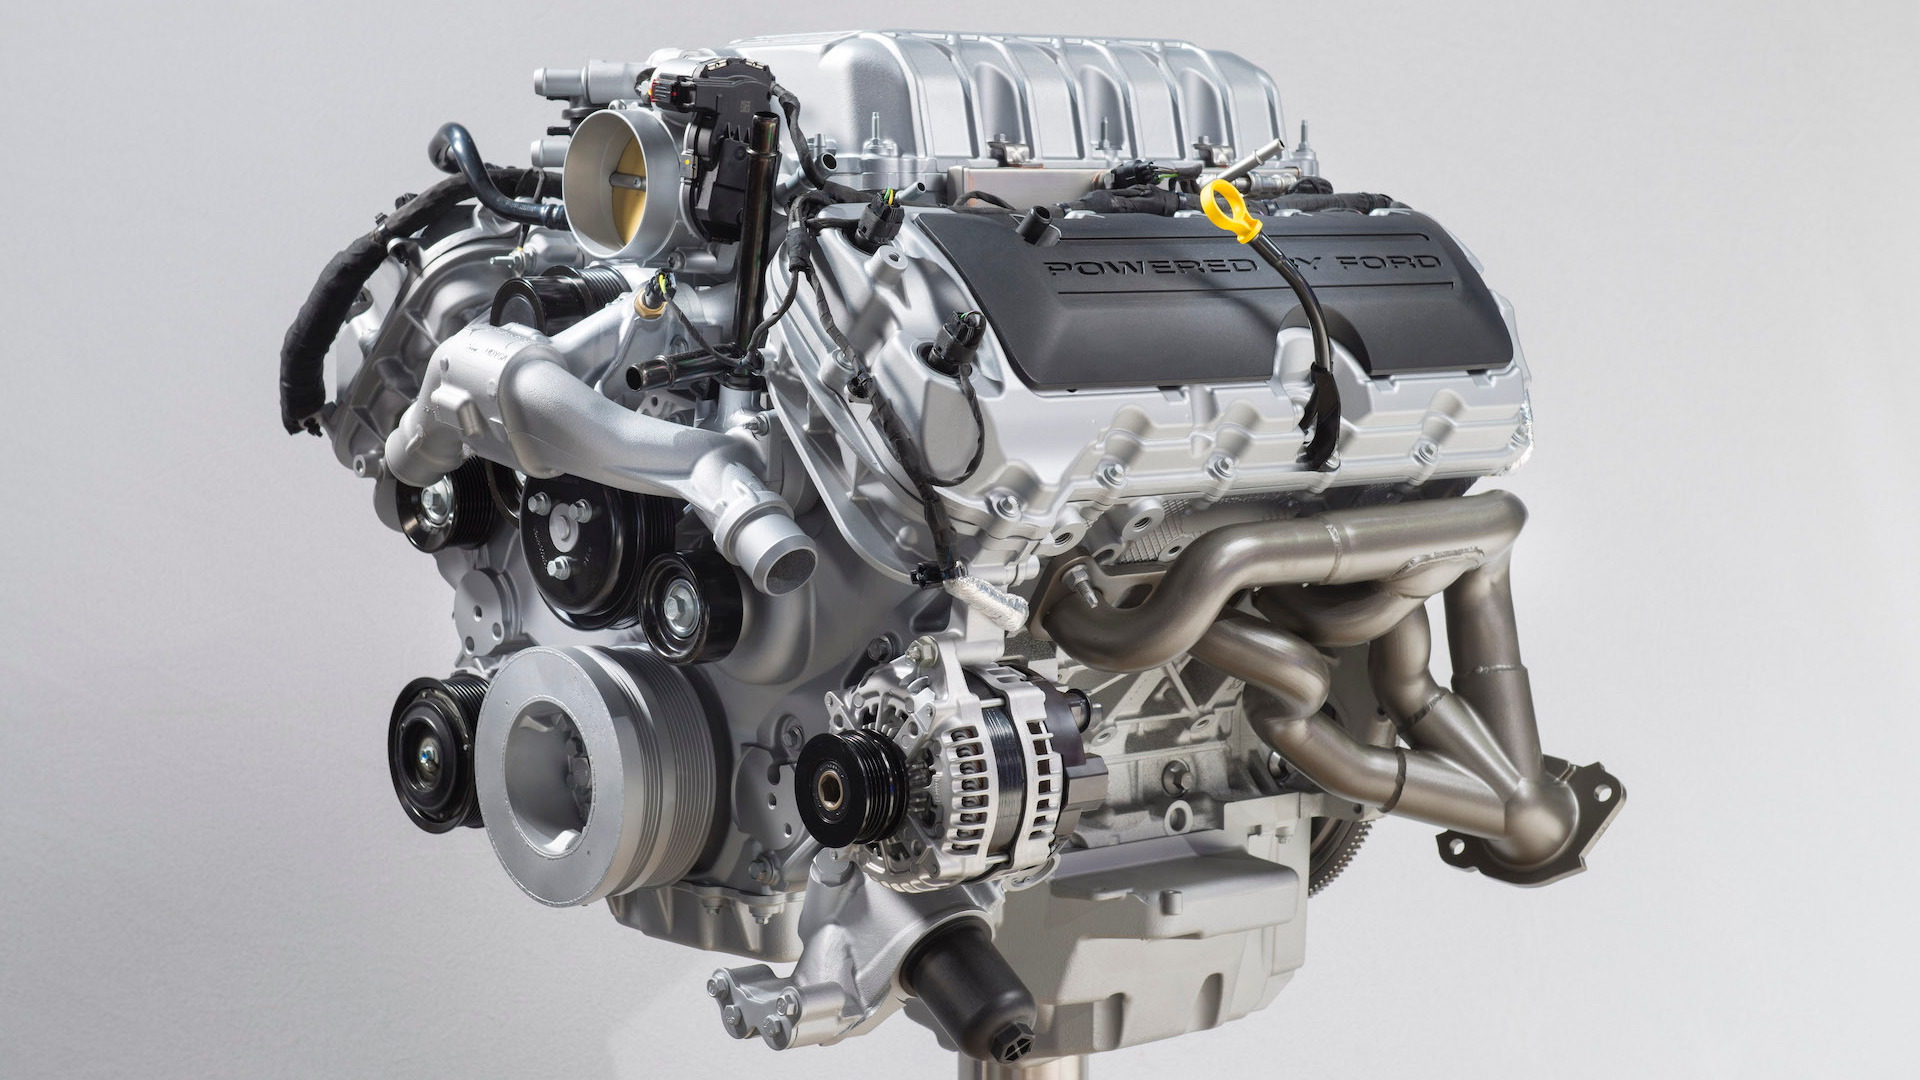 2020 Ford Mustang Shelby GT500's 5.2-liter supercharged V-8